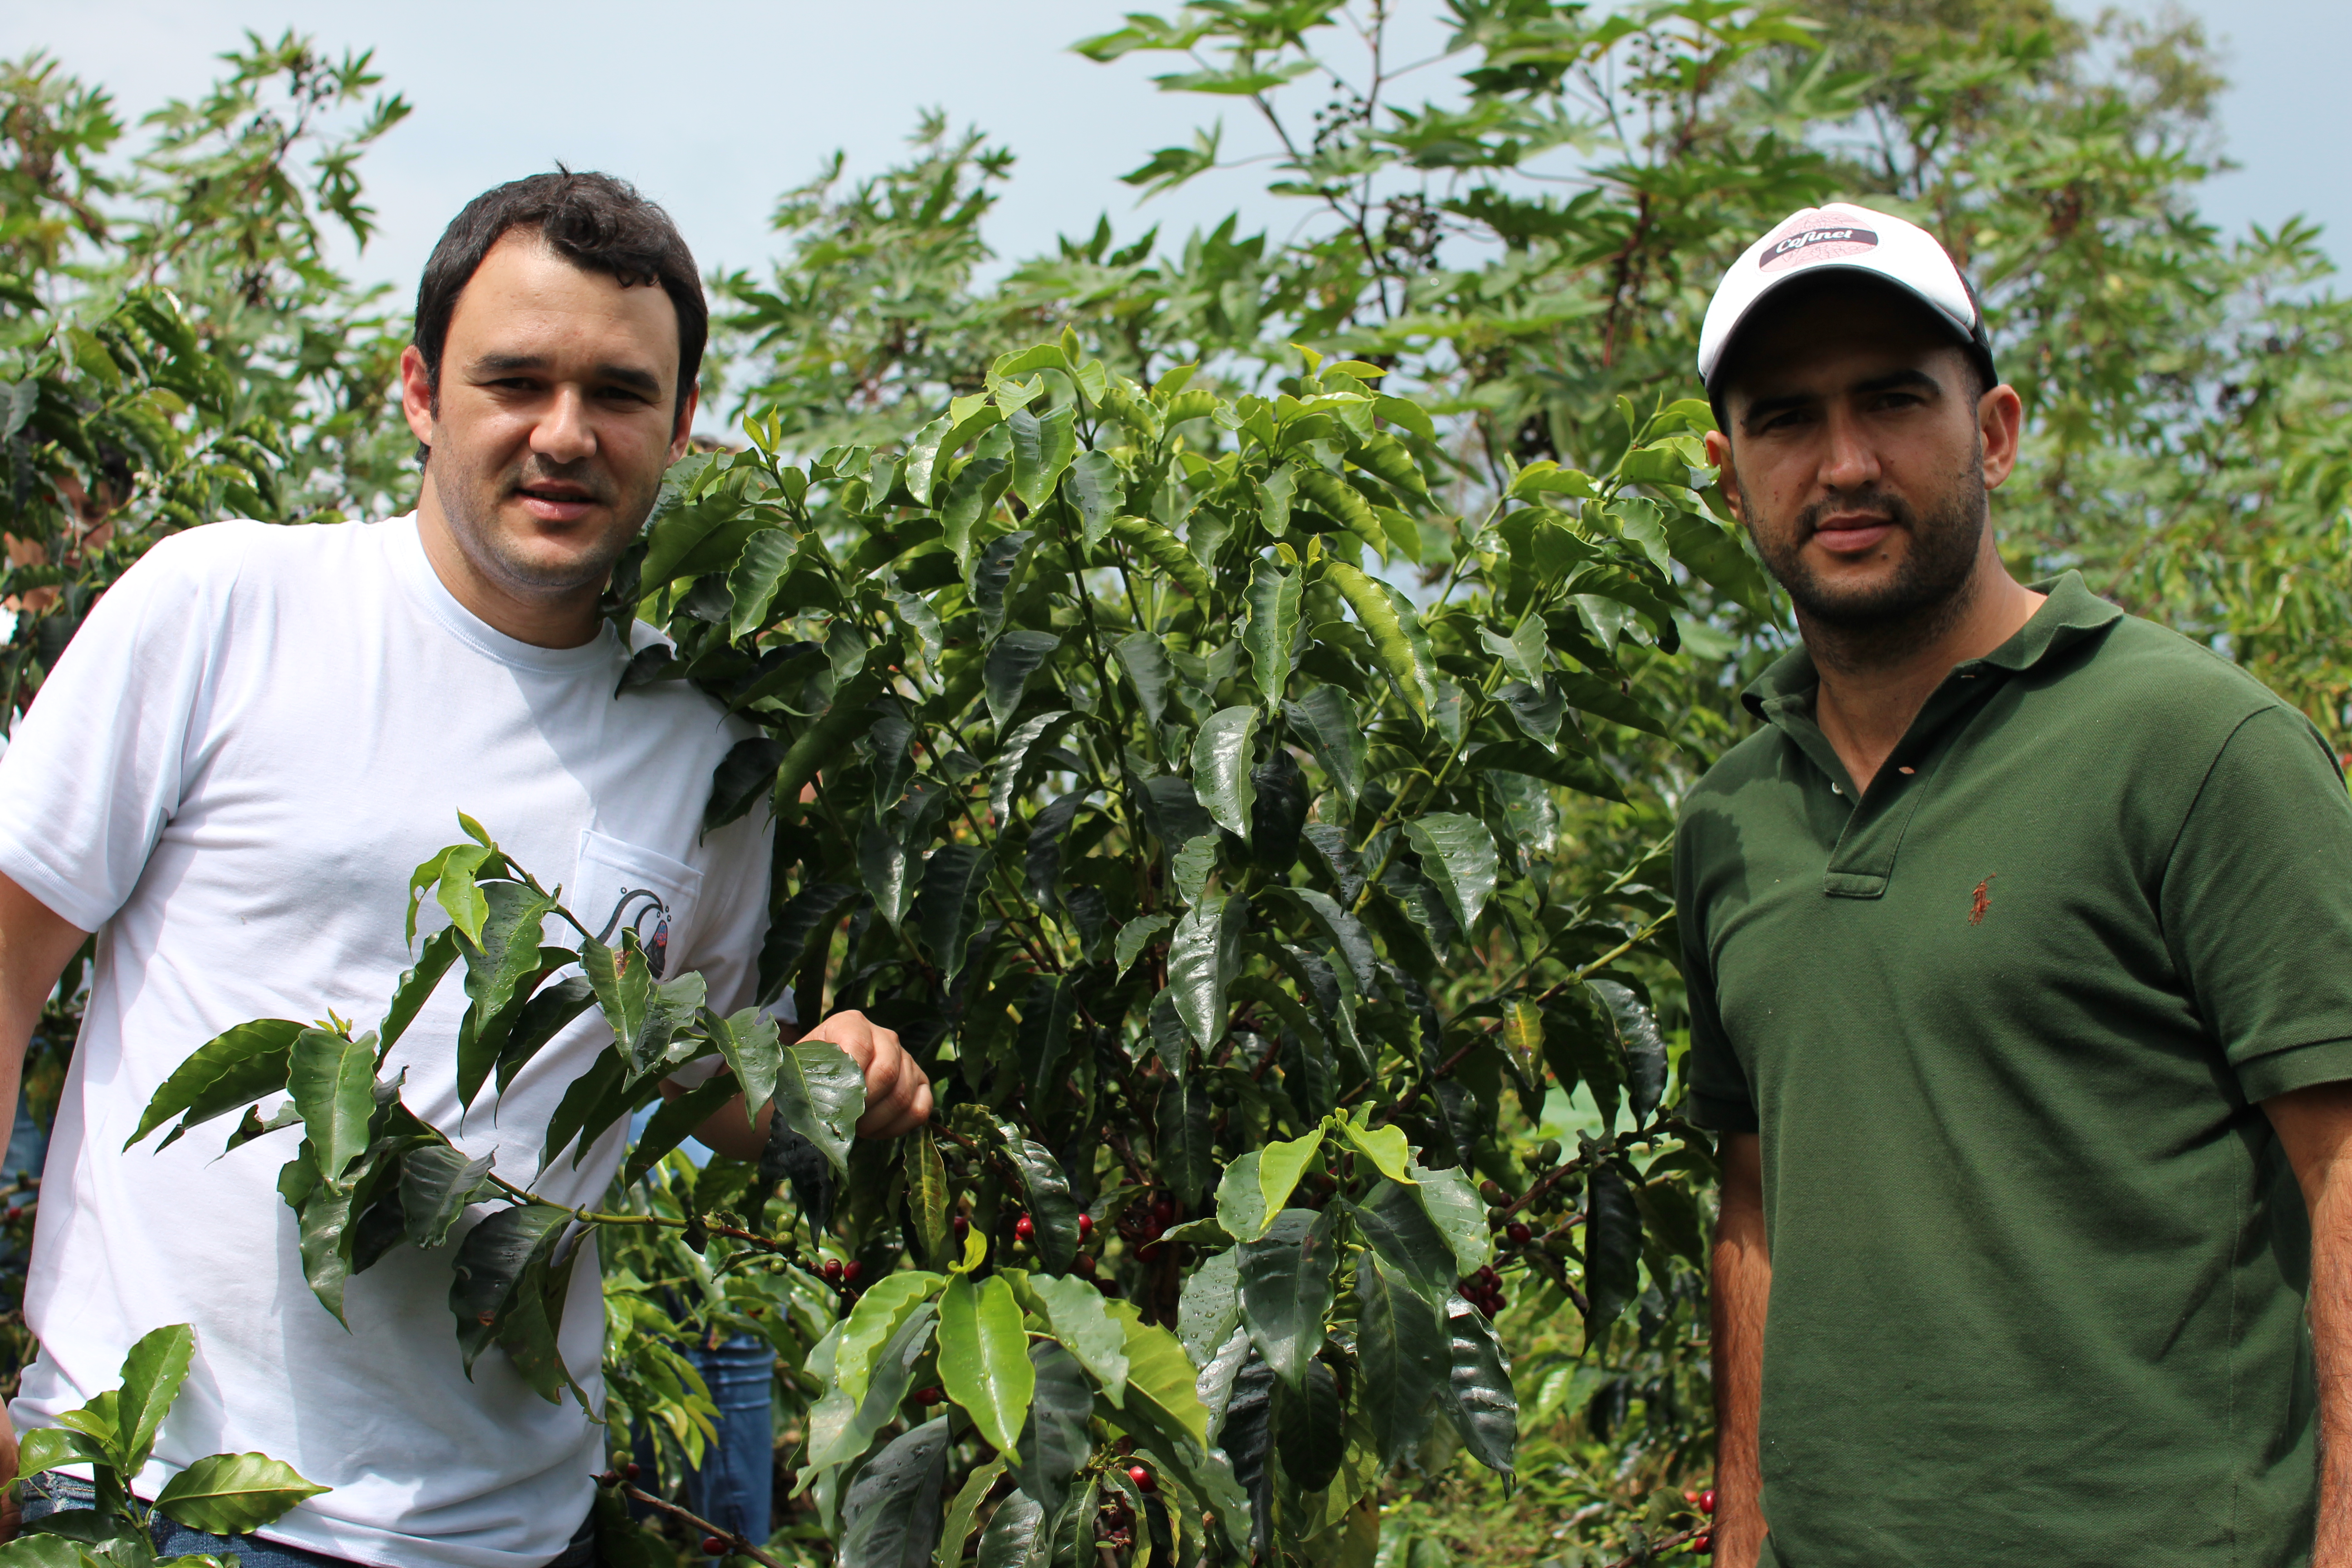 Brothers Carlos and Felipe posing next to a few coffee trees behind.